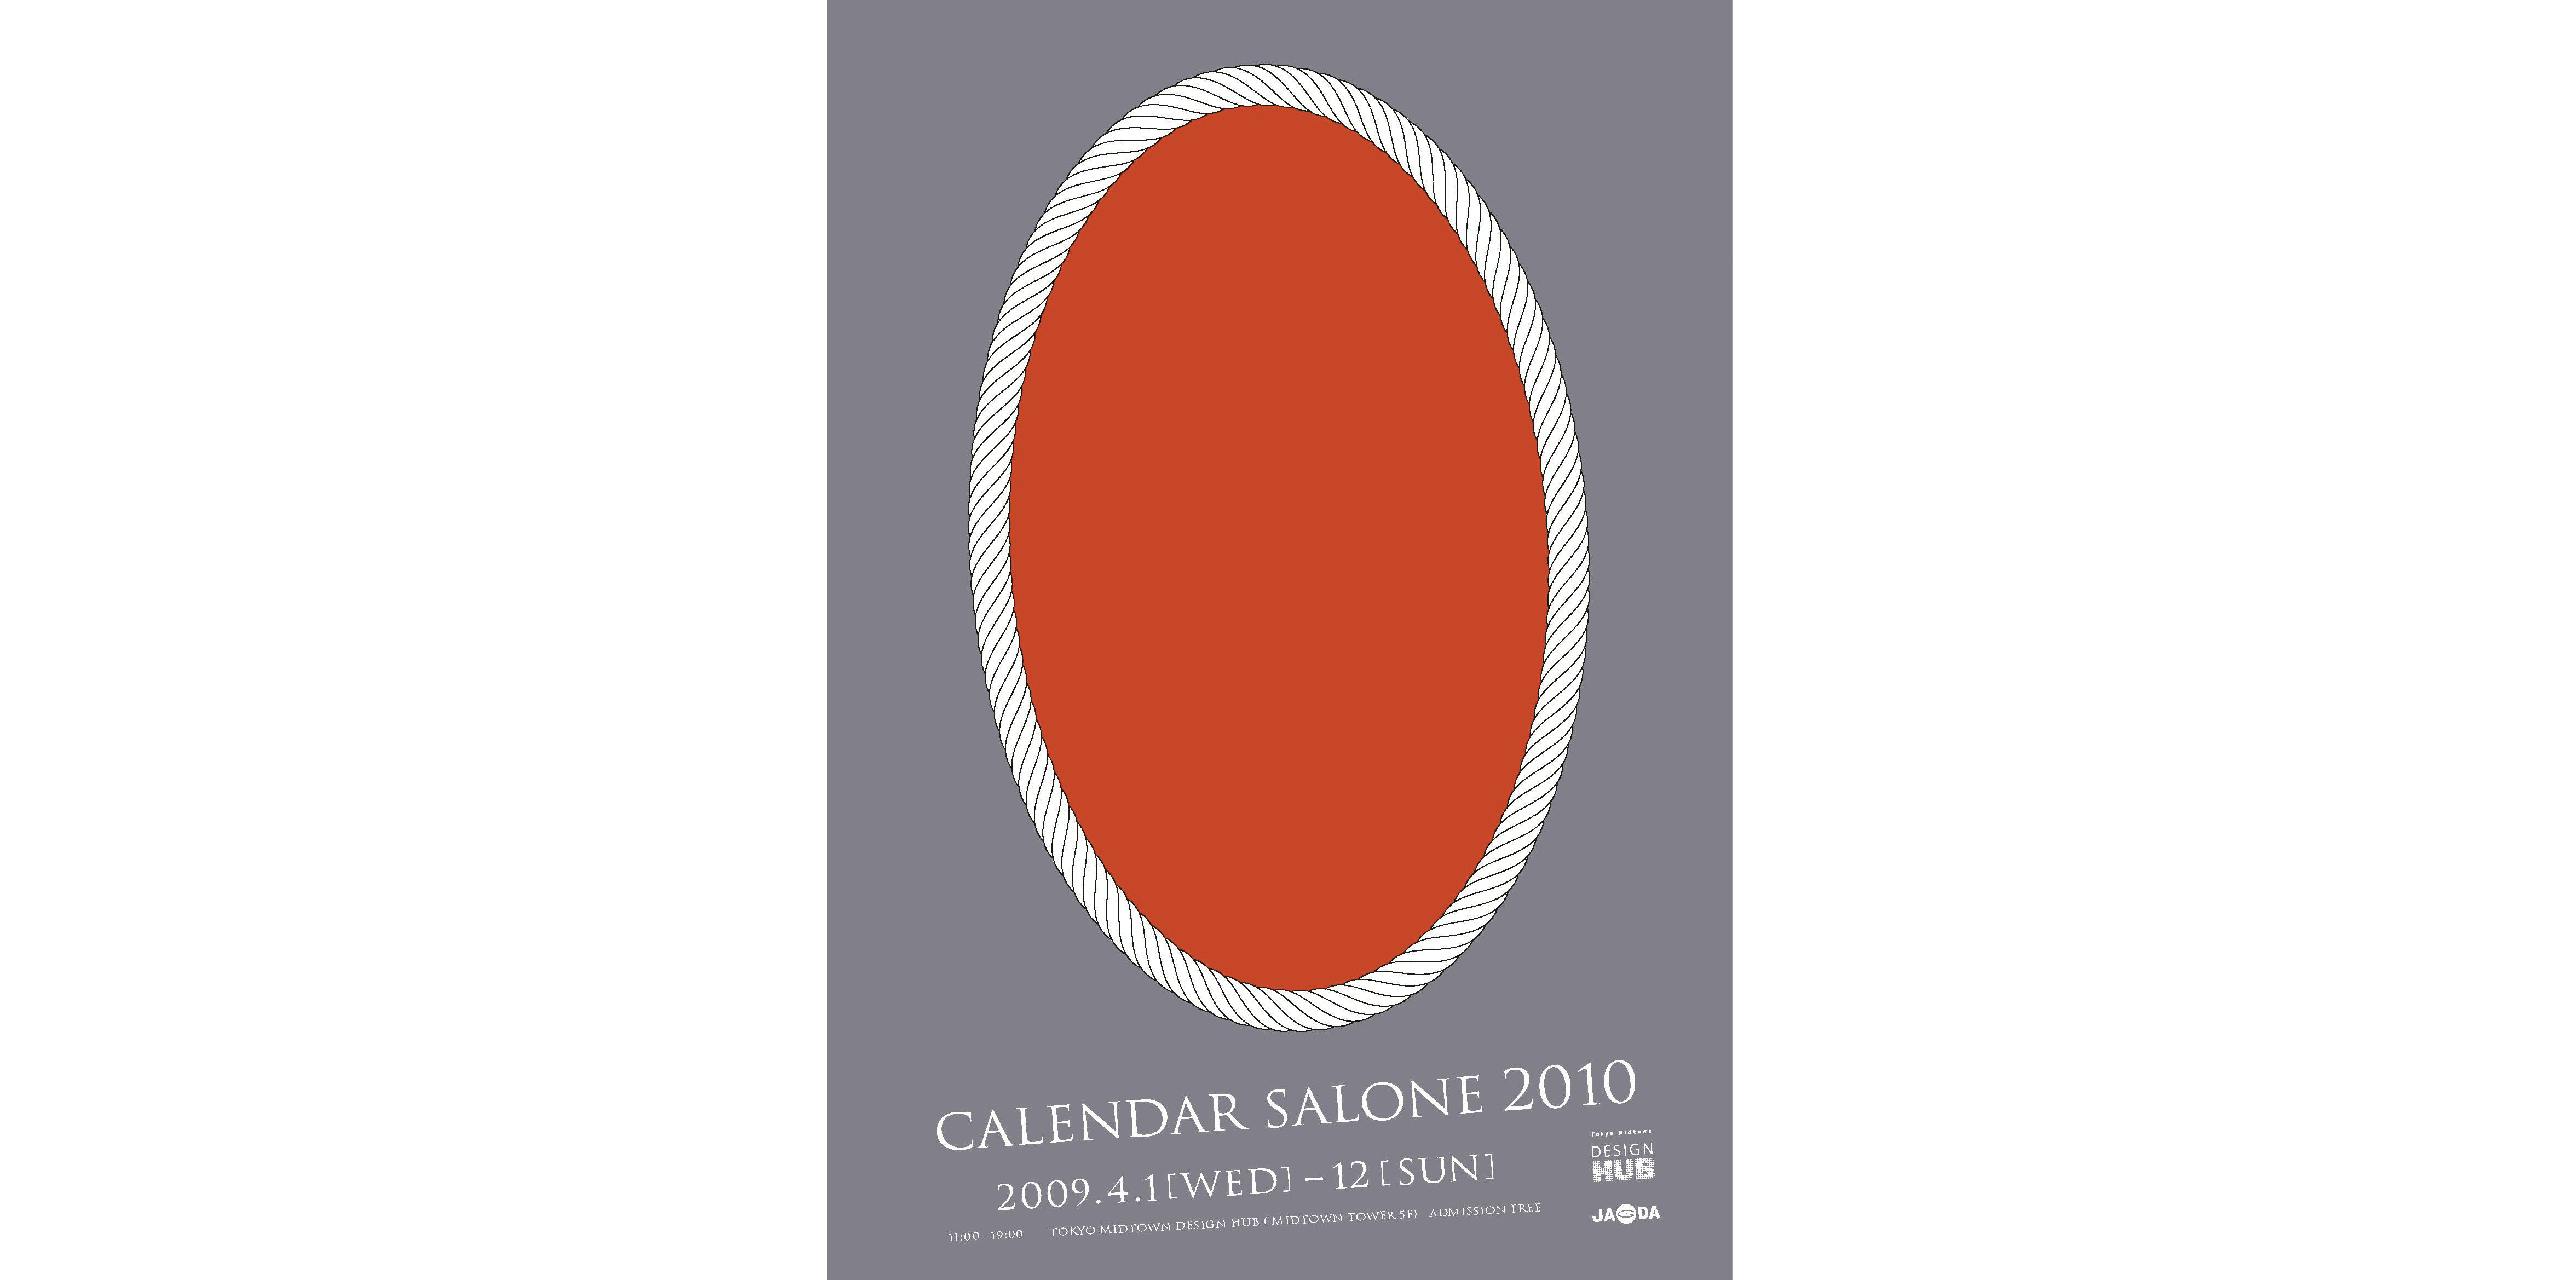 Calendar Exhibition for the year 2010